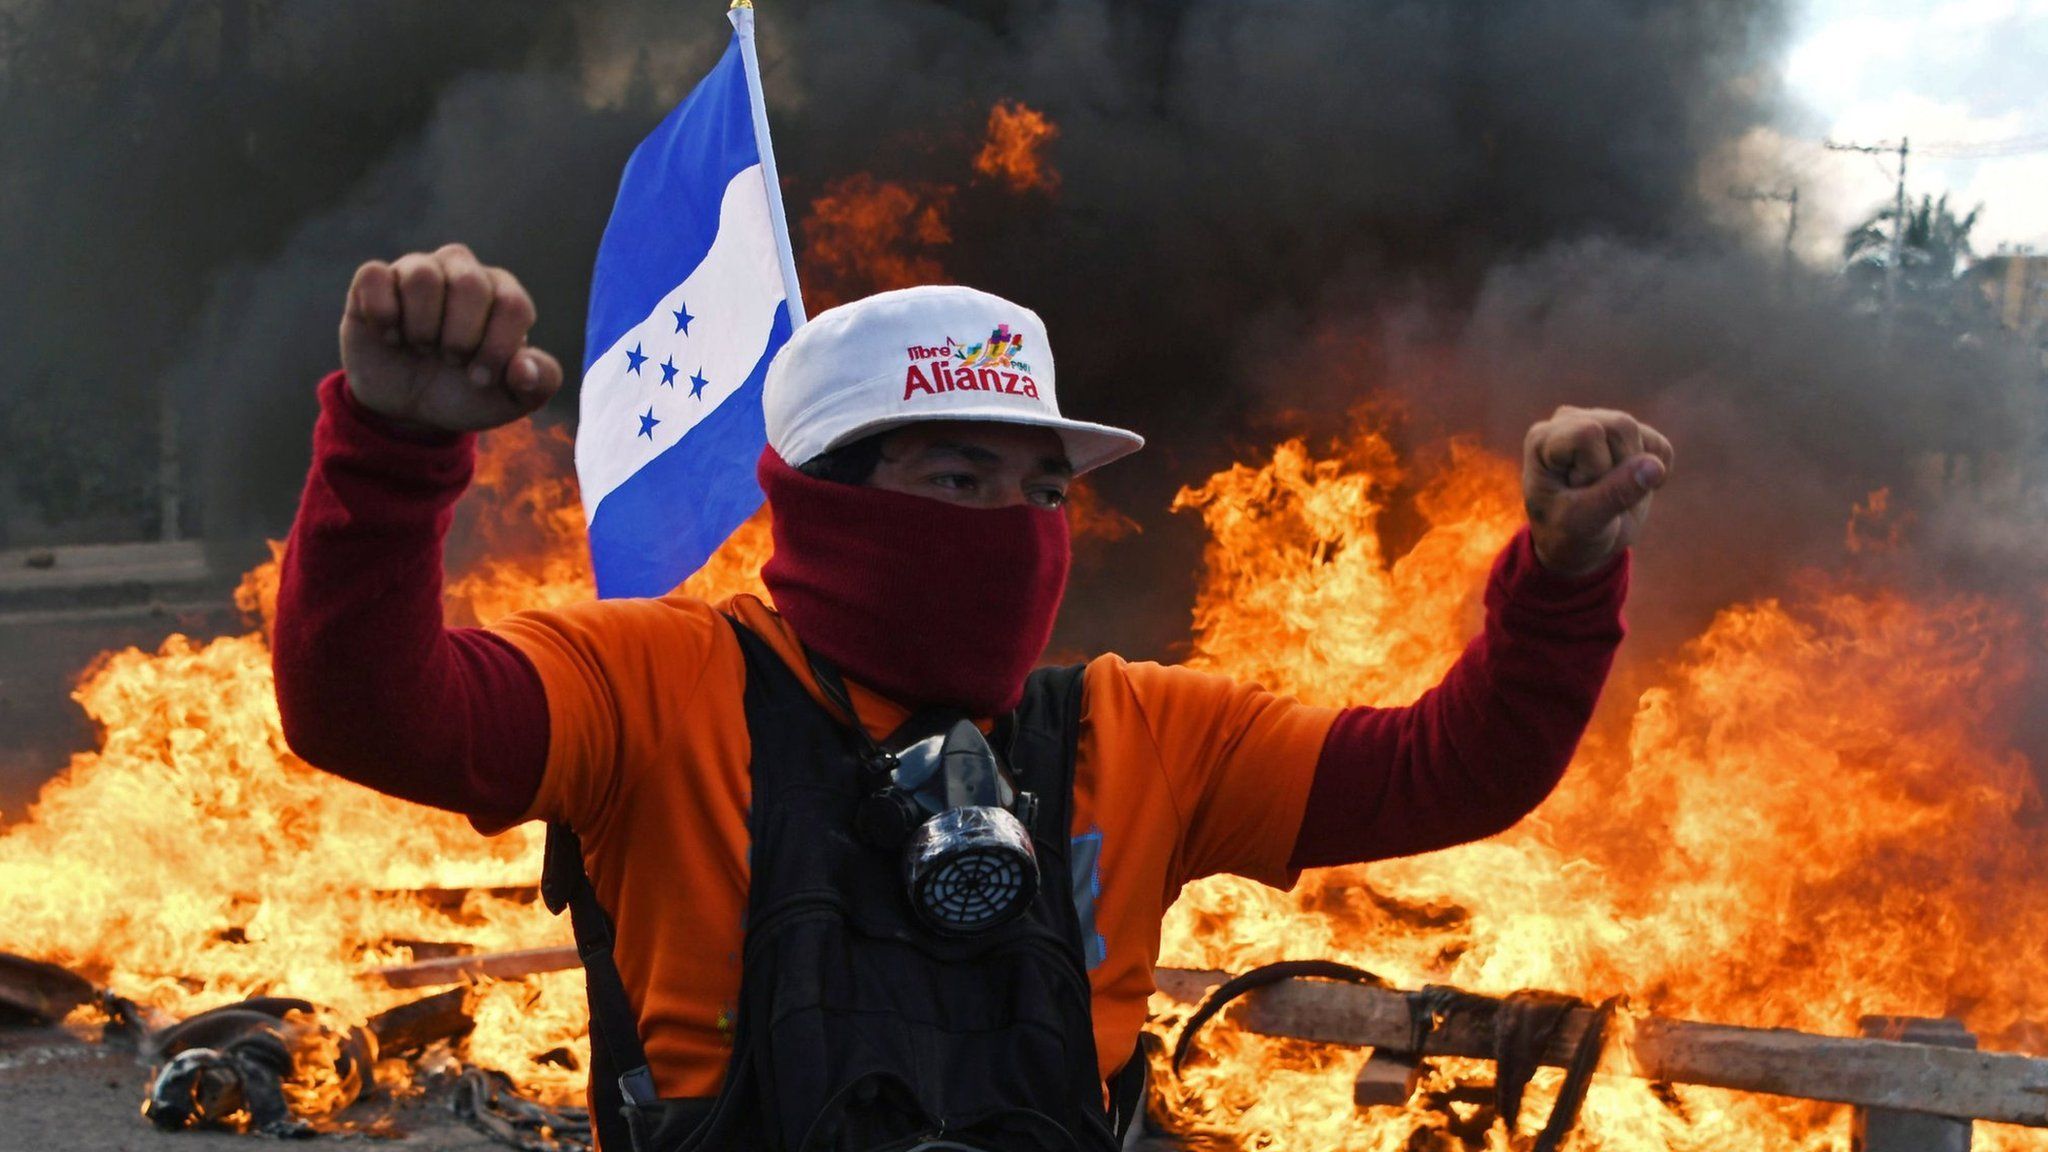 Honduran Opposition Alliance Against the Dictatorship supporter protest among barricades against president Juan Orlando Hernandez reelection, while the inauguration ceremony takes place at the Tiburcio Carias Andino national stadium, in Tegucigalpa, on January 27, 2018.